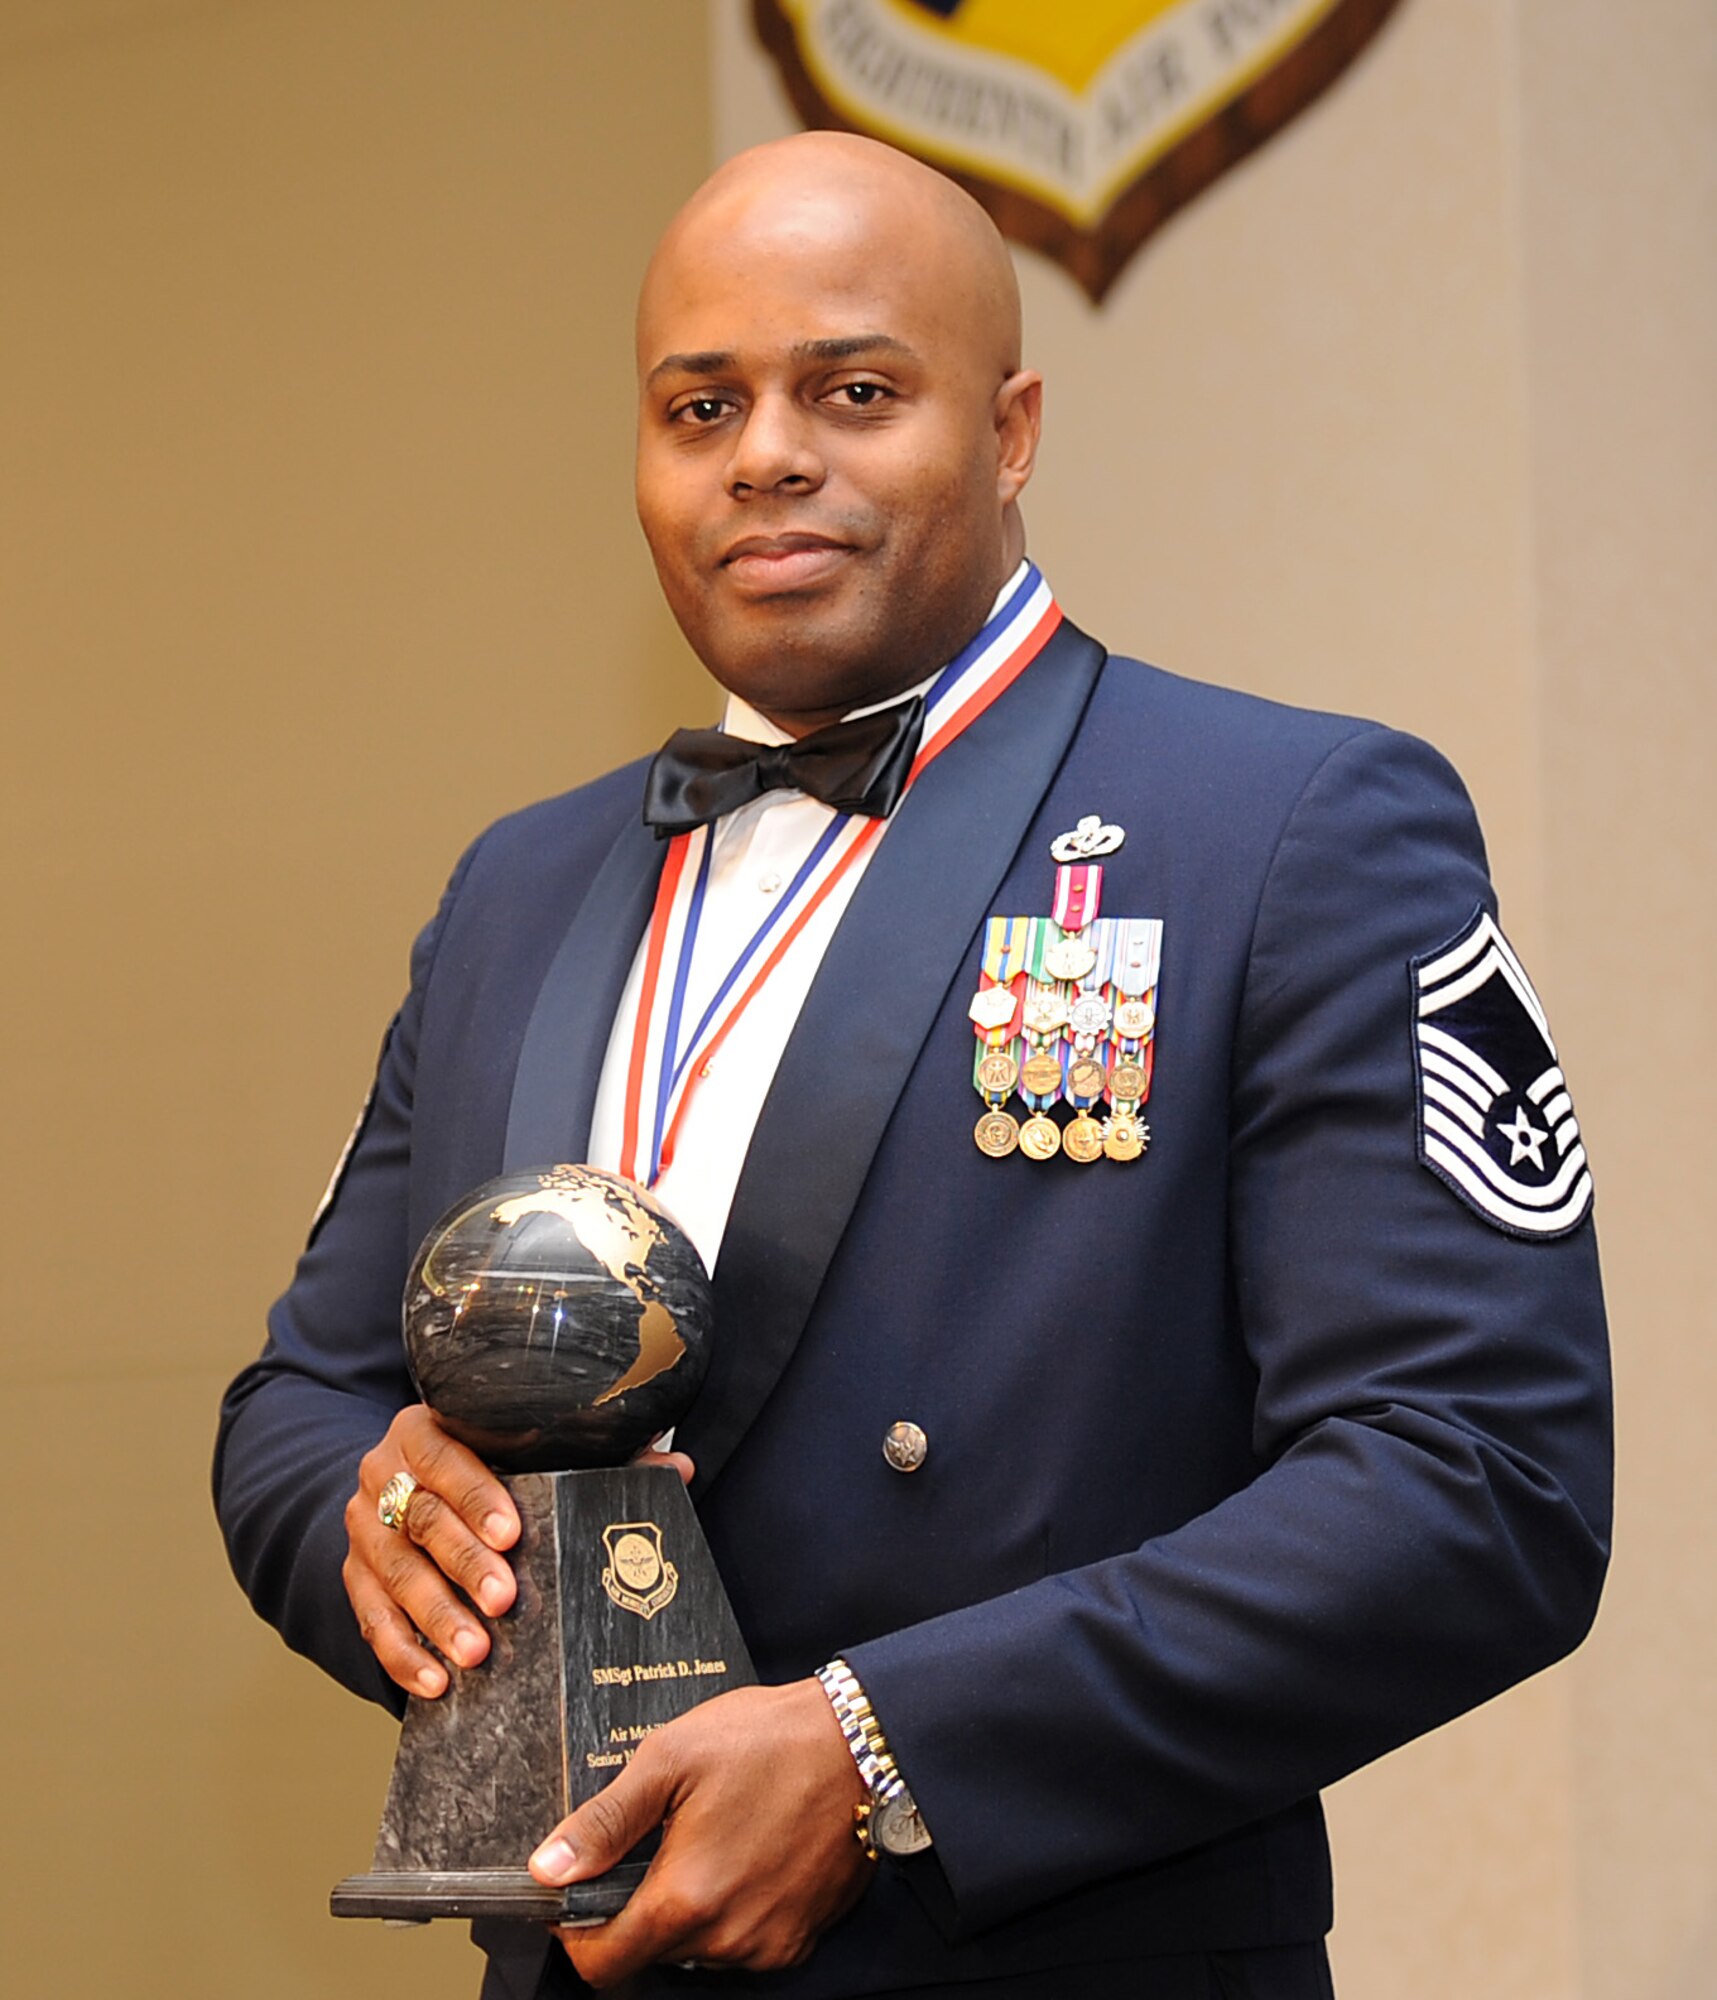 Senior Master Sgt. Patrick Jones, from the 375th Civil Engineer Squadron at Scott Air Force Base, Ill., holds his award after being named the 2010 Air Mobility Command Senior NCO of the Year during AMC's Outstanding Airmen of the Year banquet April 1, 2011, at Scott Air Force Base, Ill. (U.S. Air Force Photo/Airman 1st Class Divine Cox)
